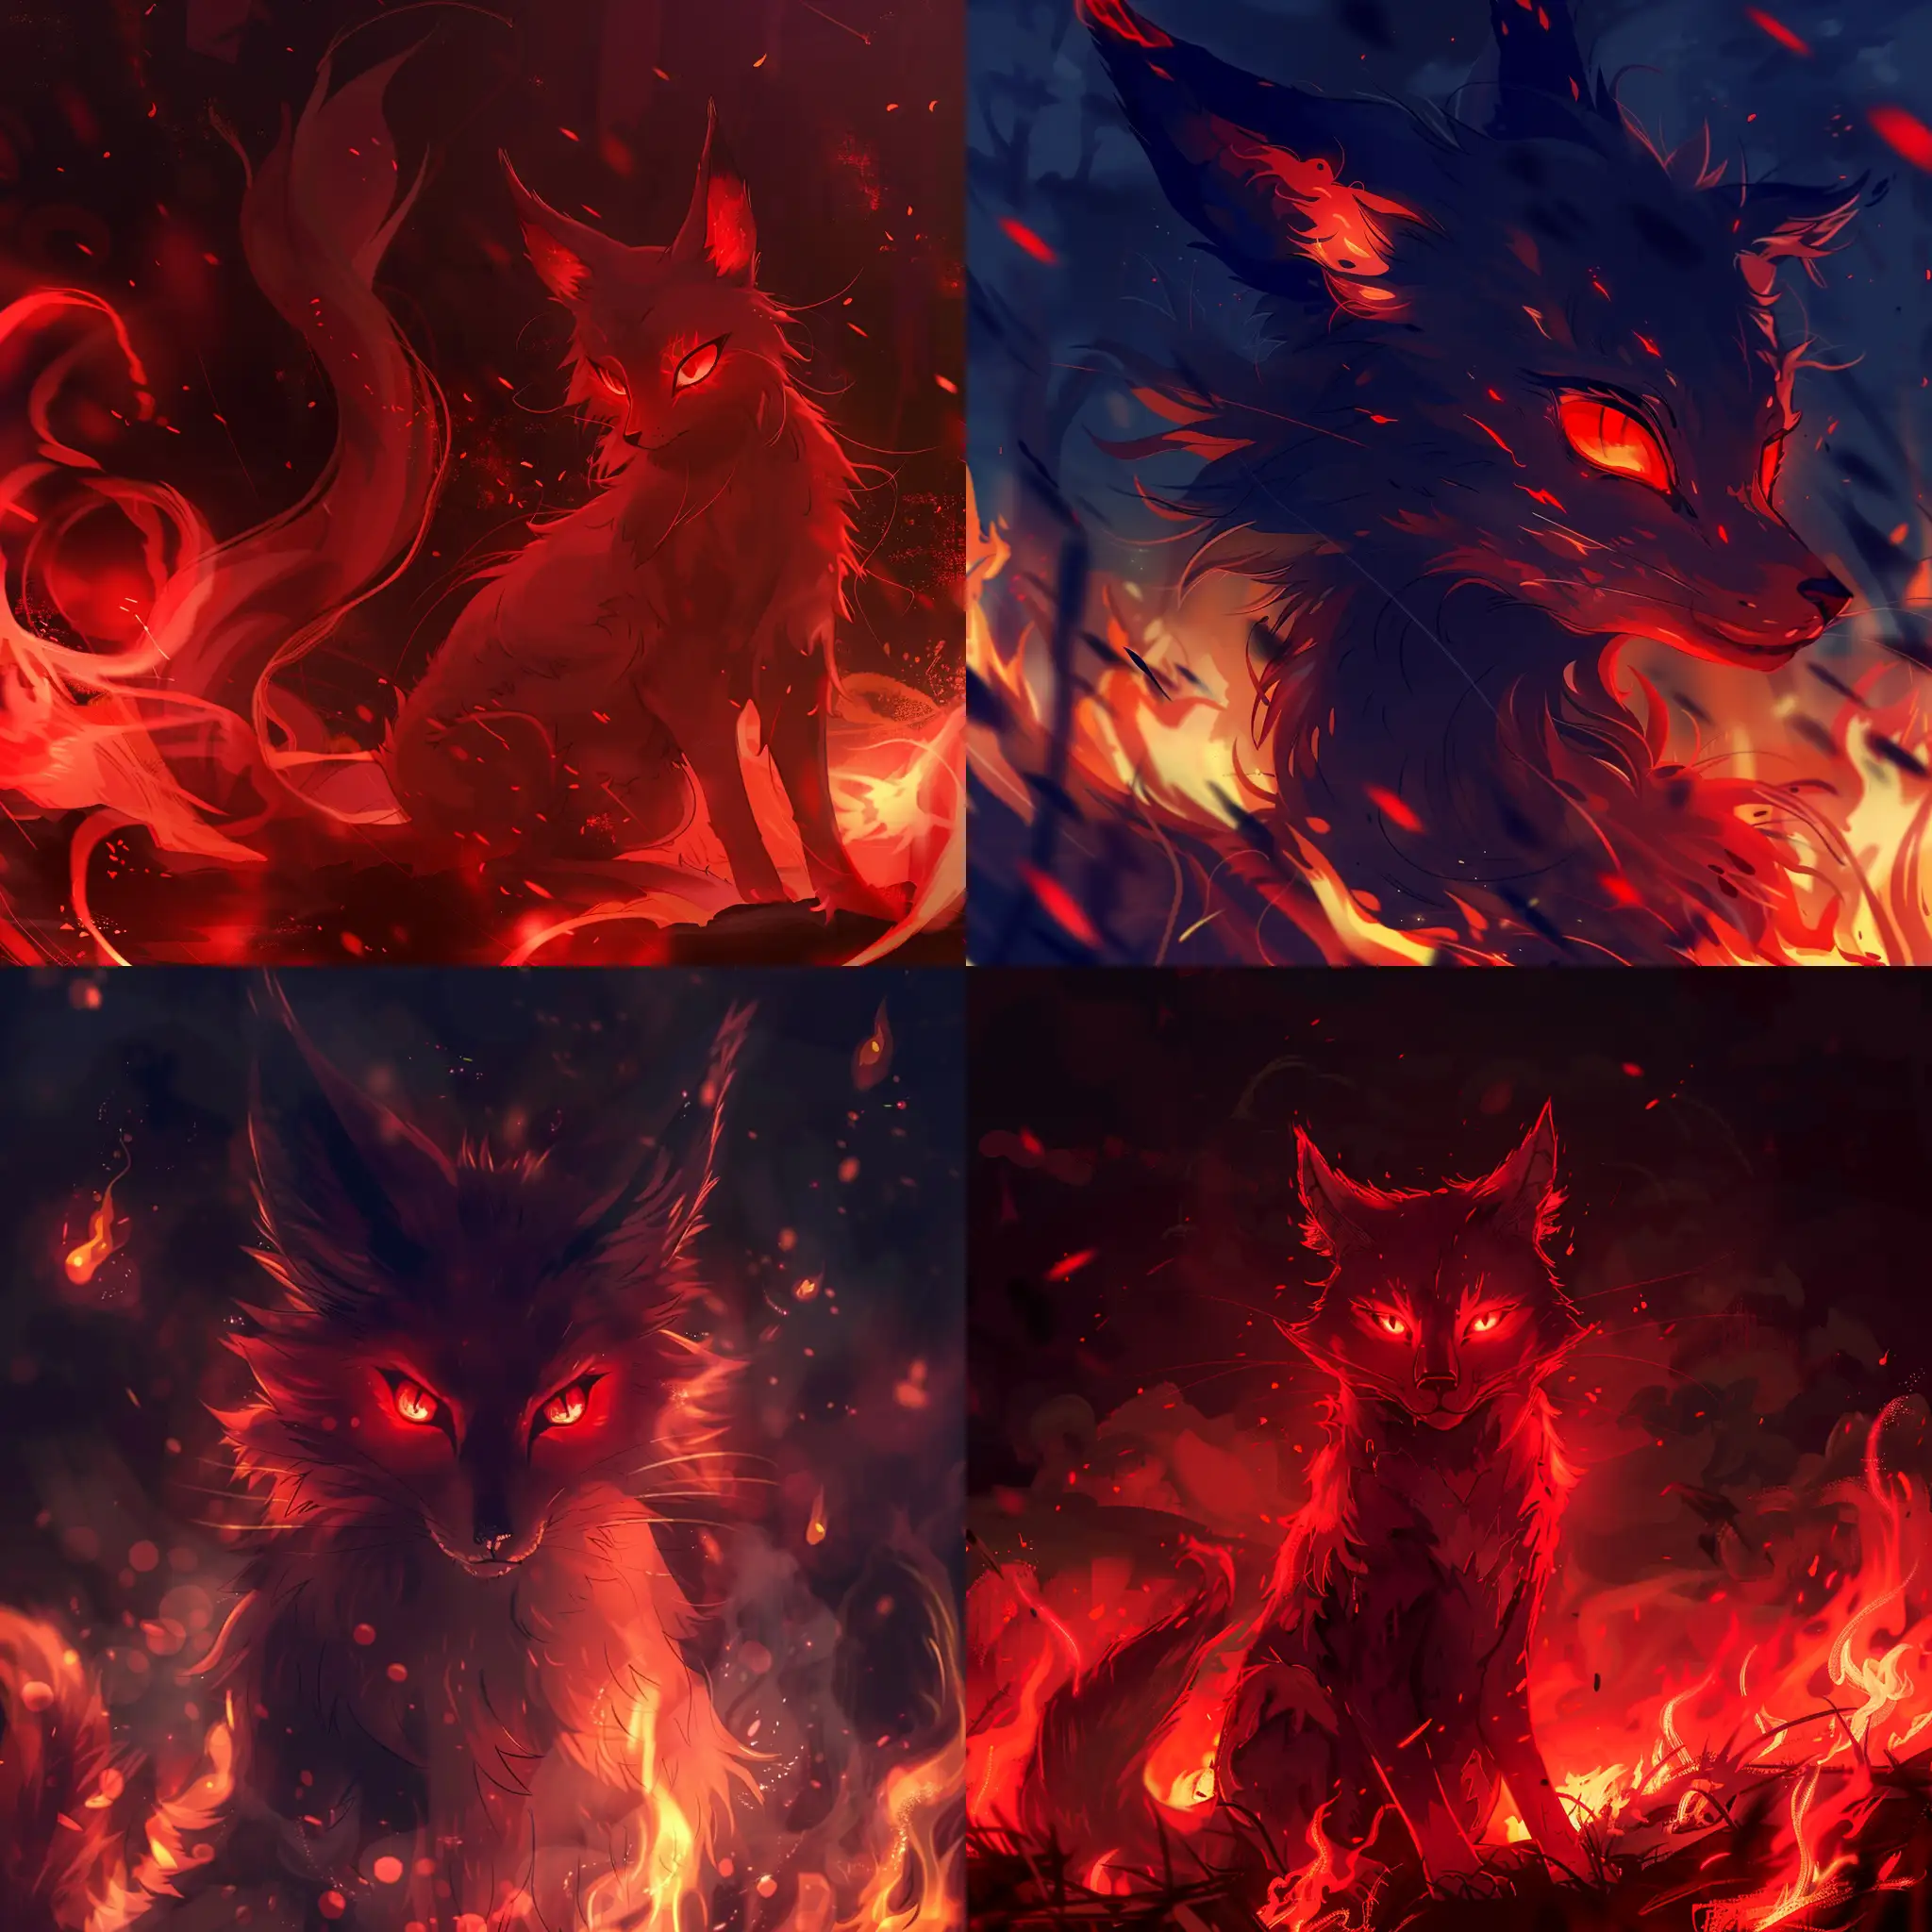 Fire red elemental kitsune, flames in the background, night, red eyes, nine tails, mystical, anime style